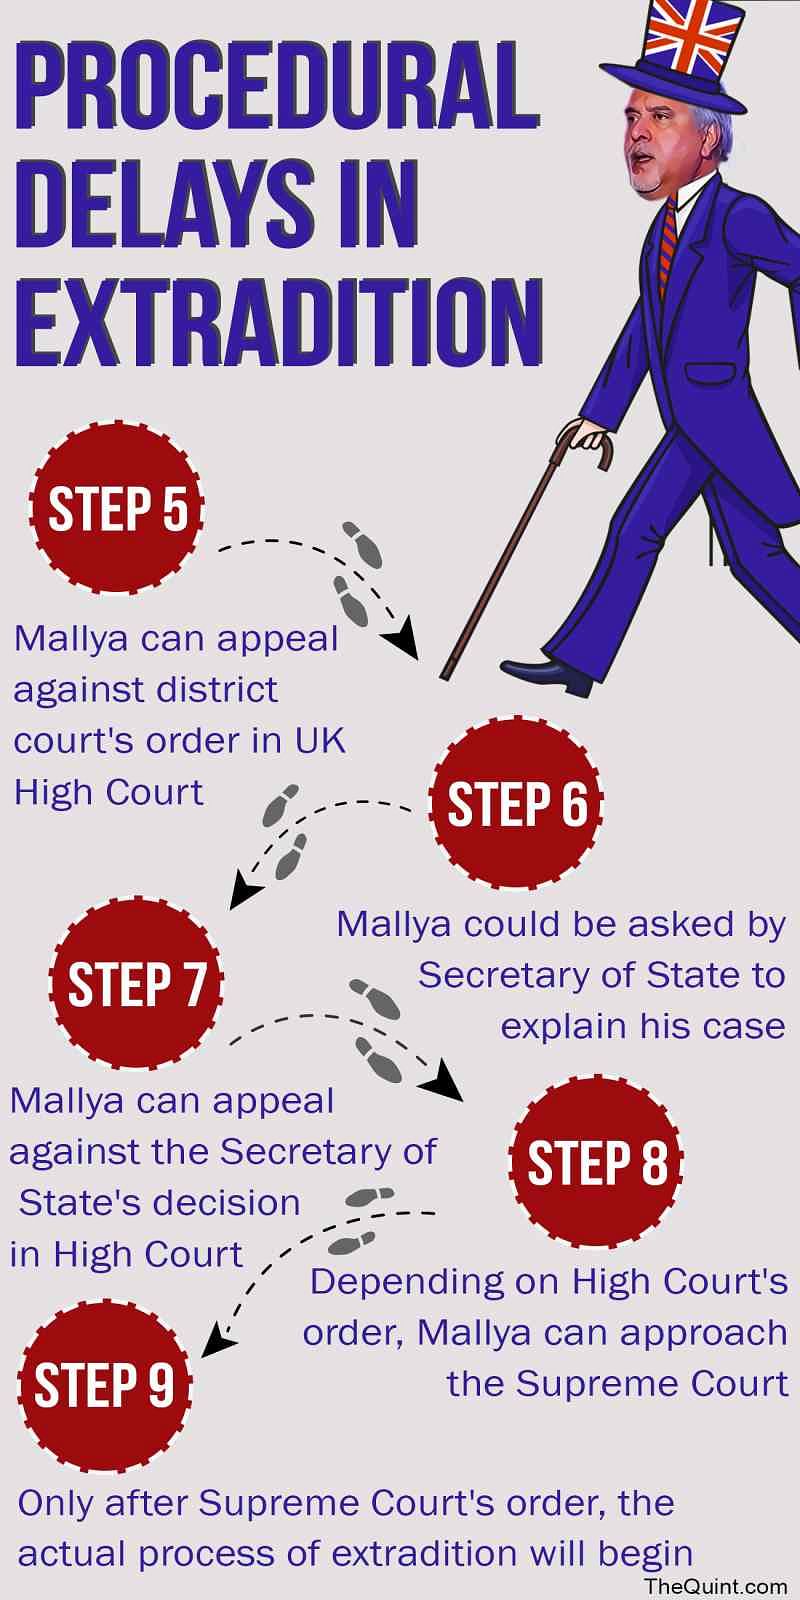 What are the next steps for Vijay Mallya after the UK Home Secretary approved his extradition? Can he still appeal?